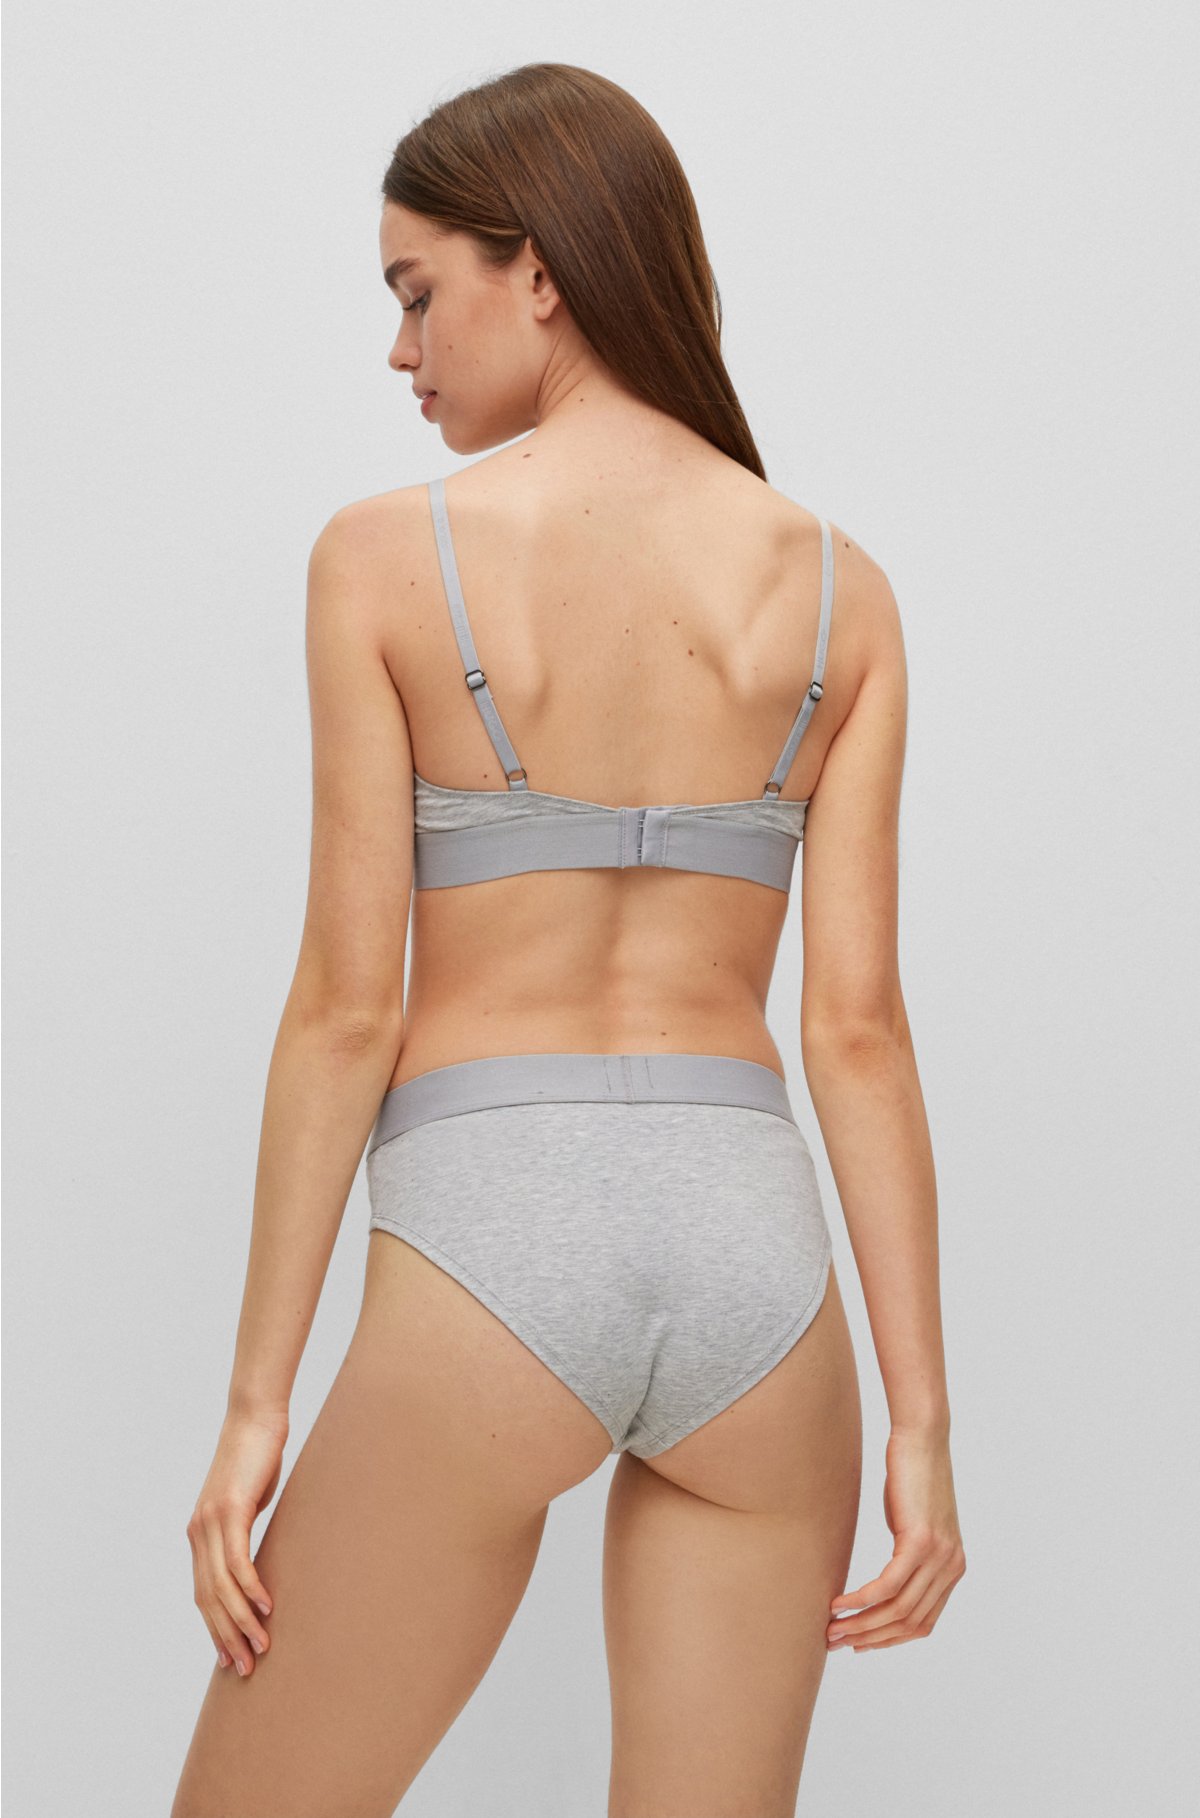 Kindly Yours Women's Sustainable Bras & Underwear from $6.50 After